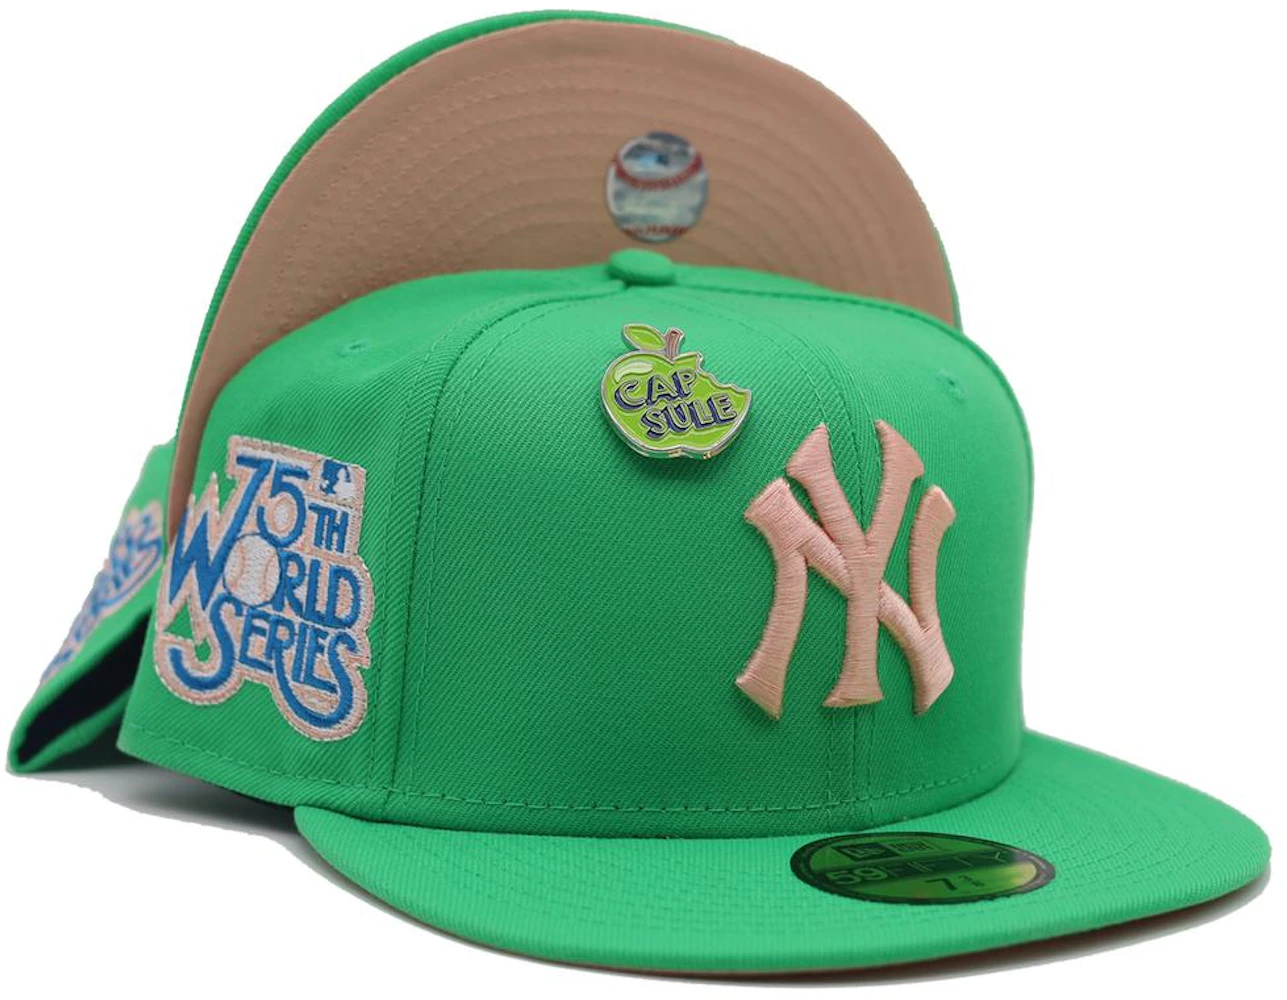 New Era New York Yankees Capsule Apple Collection 75th World Series Capsule  Hats Exclusive 59Fifty Fitted Hat Green/Peach Men's - FW21 - US